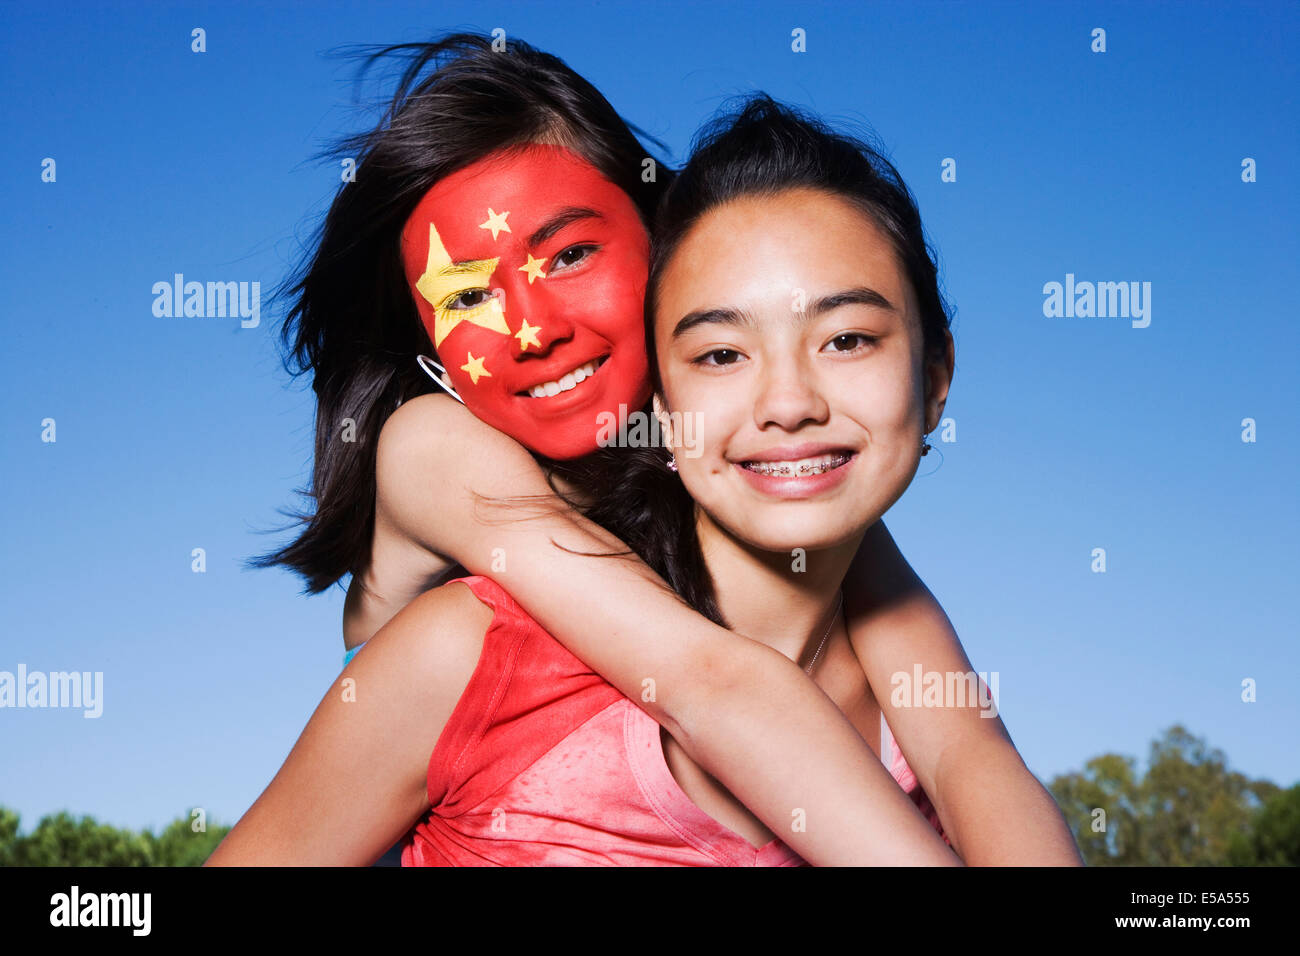 Chinese girl with Chinese flag painted on face hugging friend Stock Photo